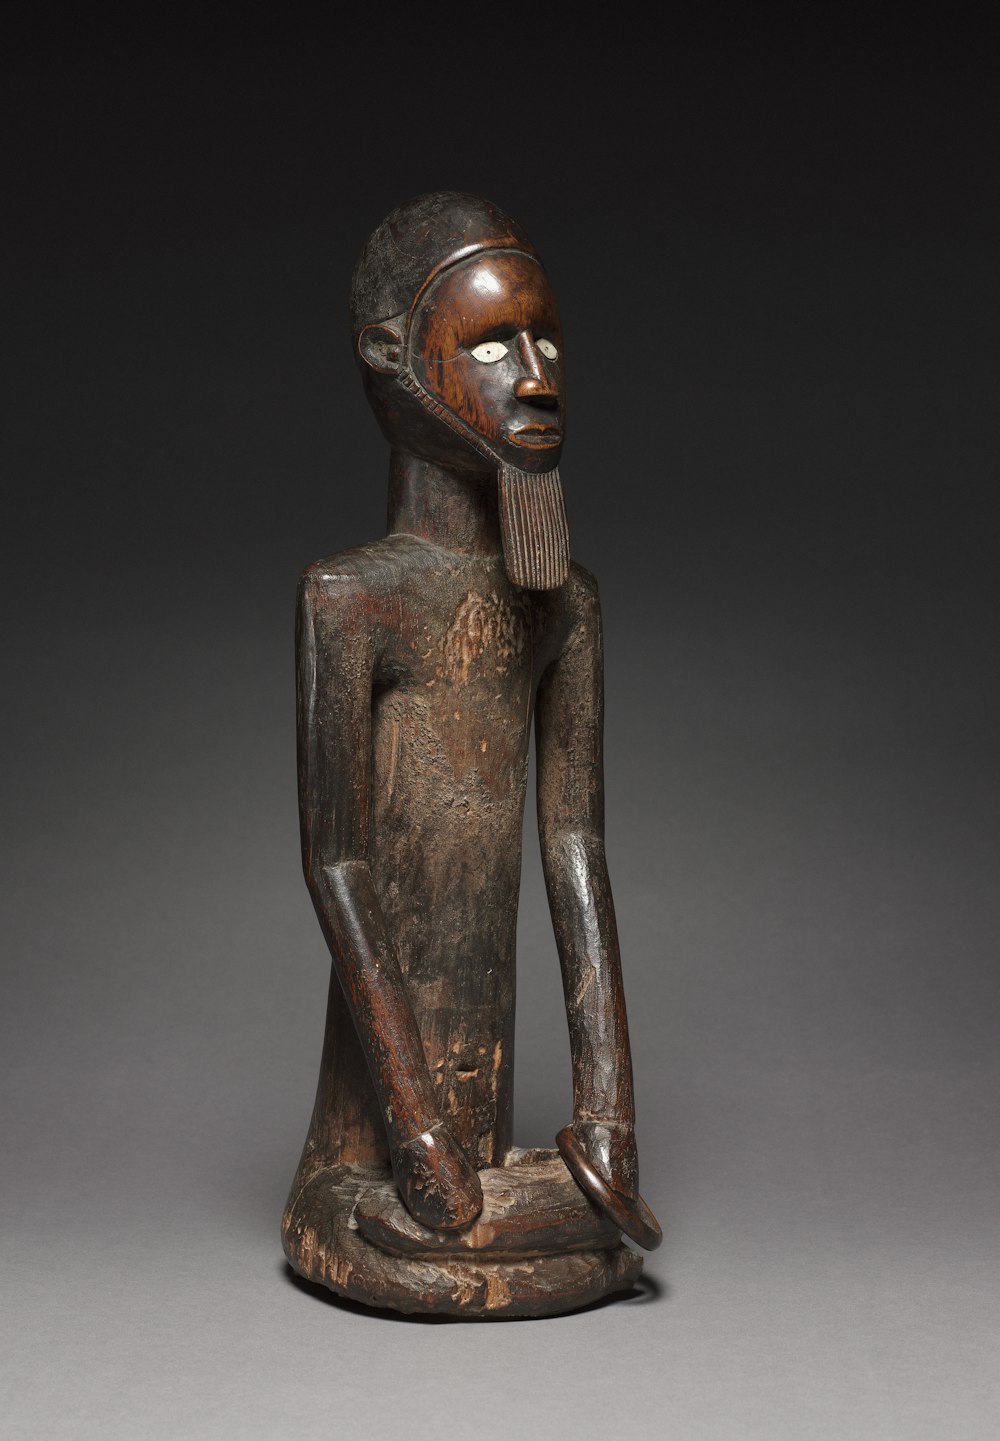 a wooden statue of a seated person